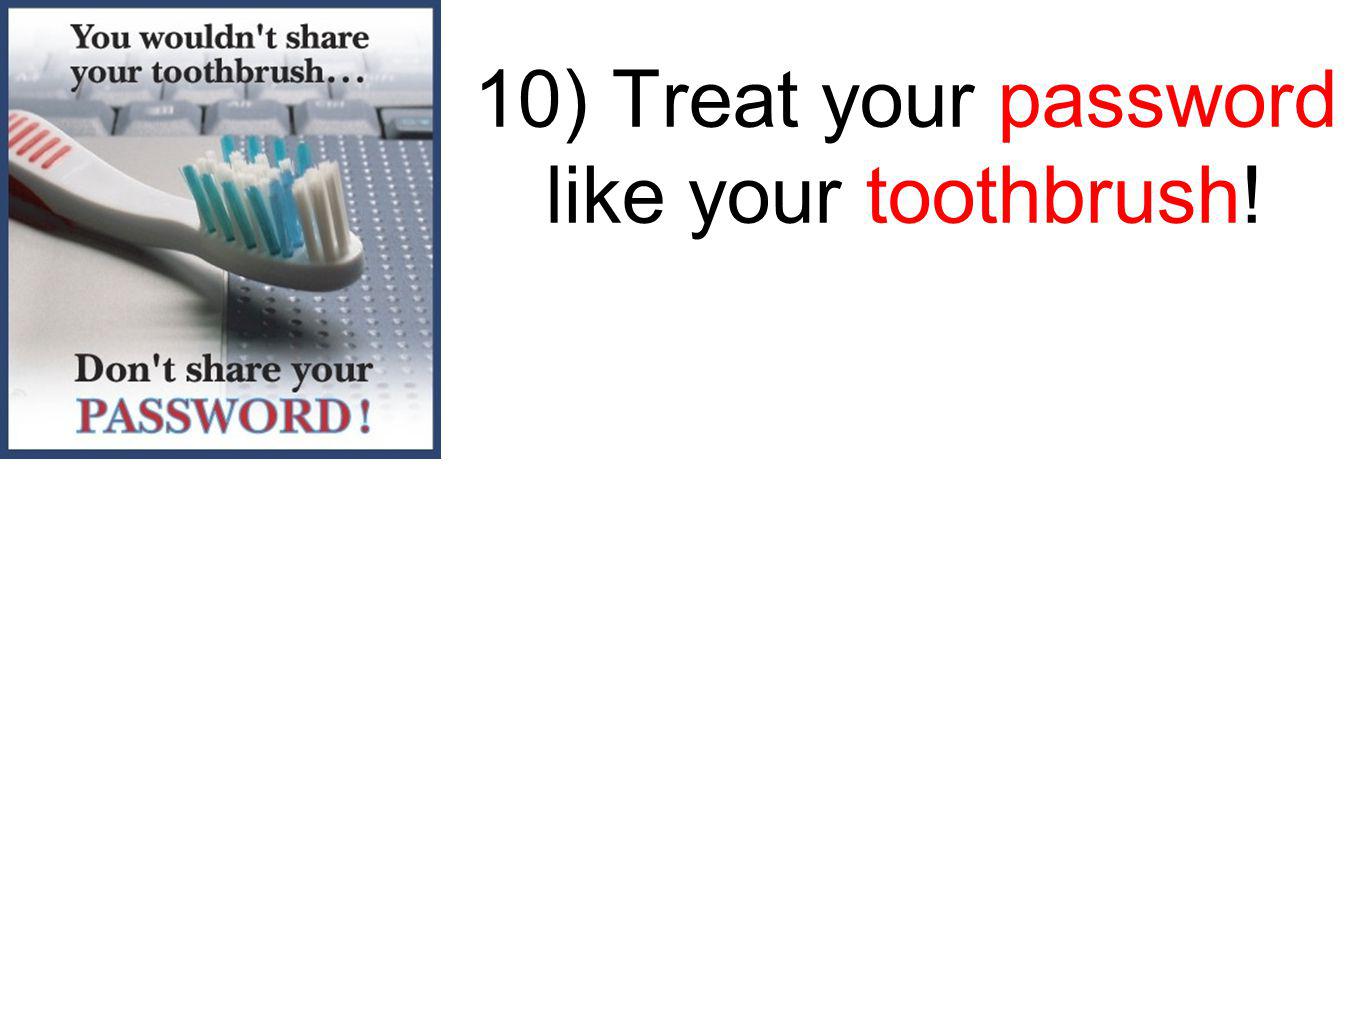 10) Treat your password like your toothbrush!